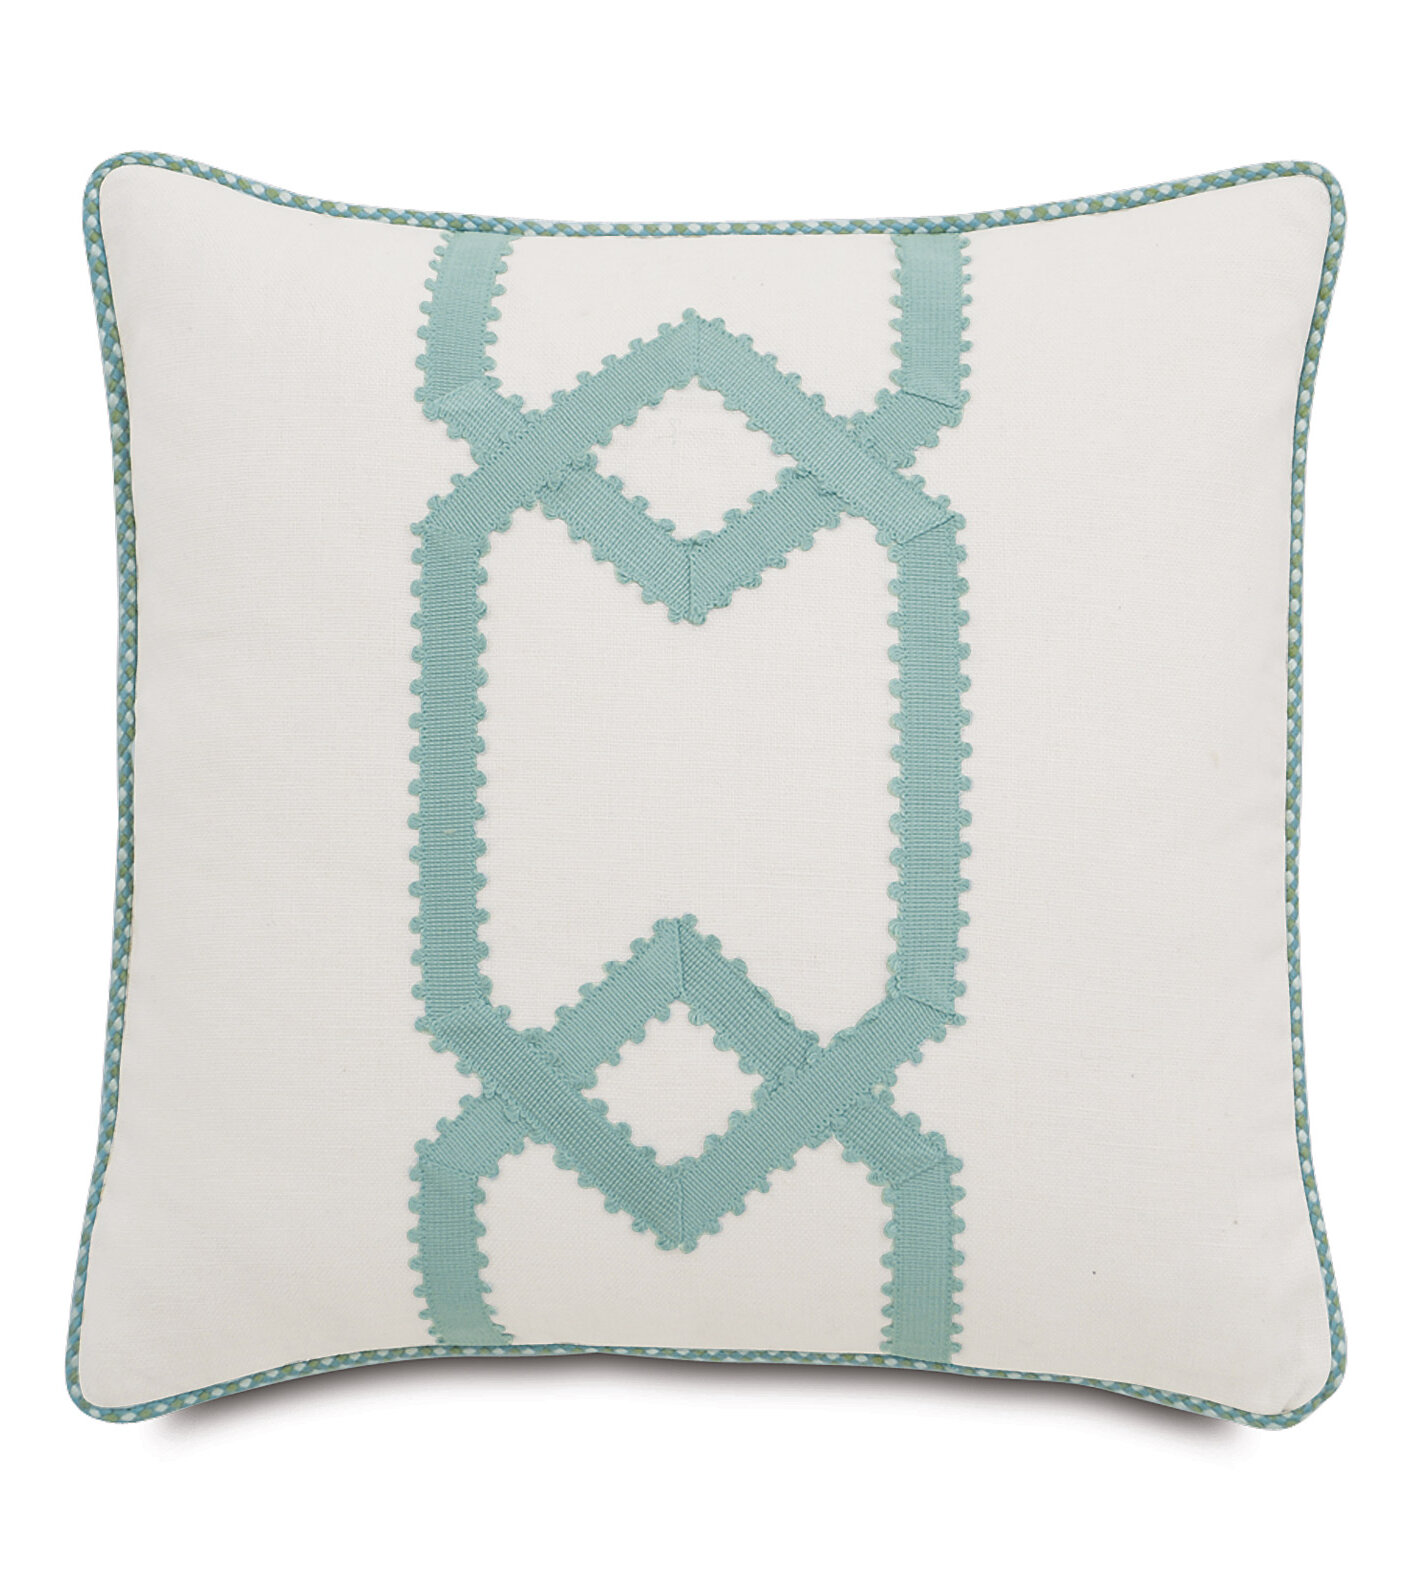 Eastern Accents Magnolia Filly White with Gimp Design Square Pillow ...